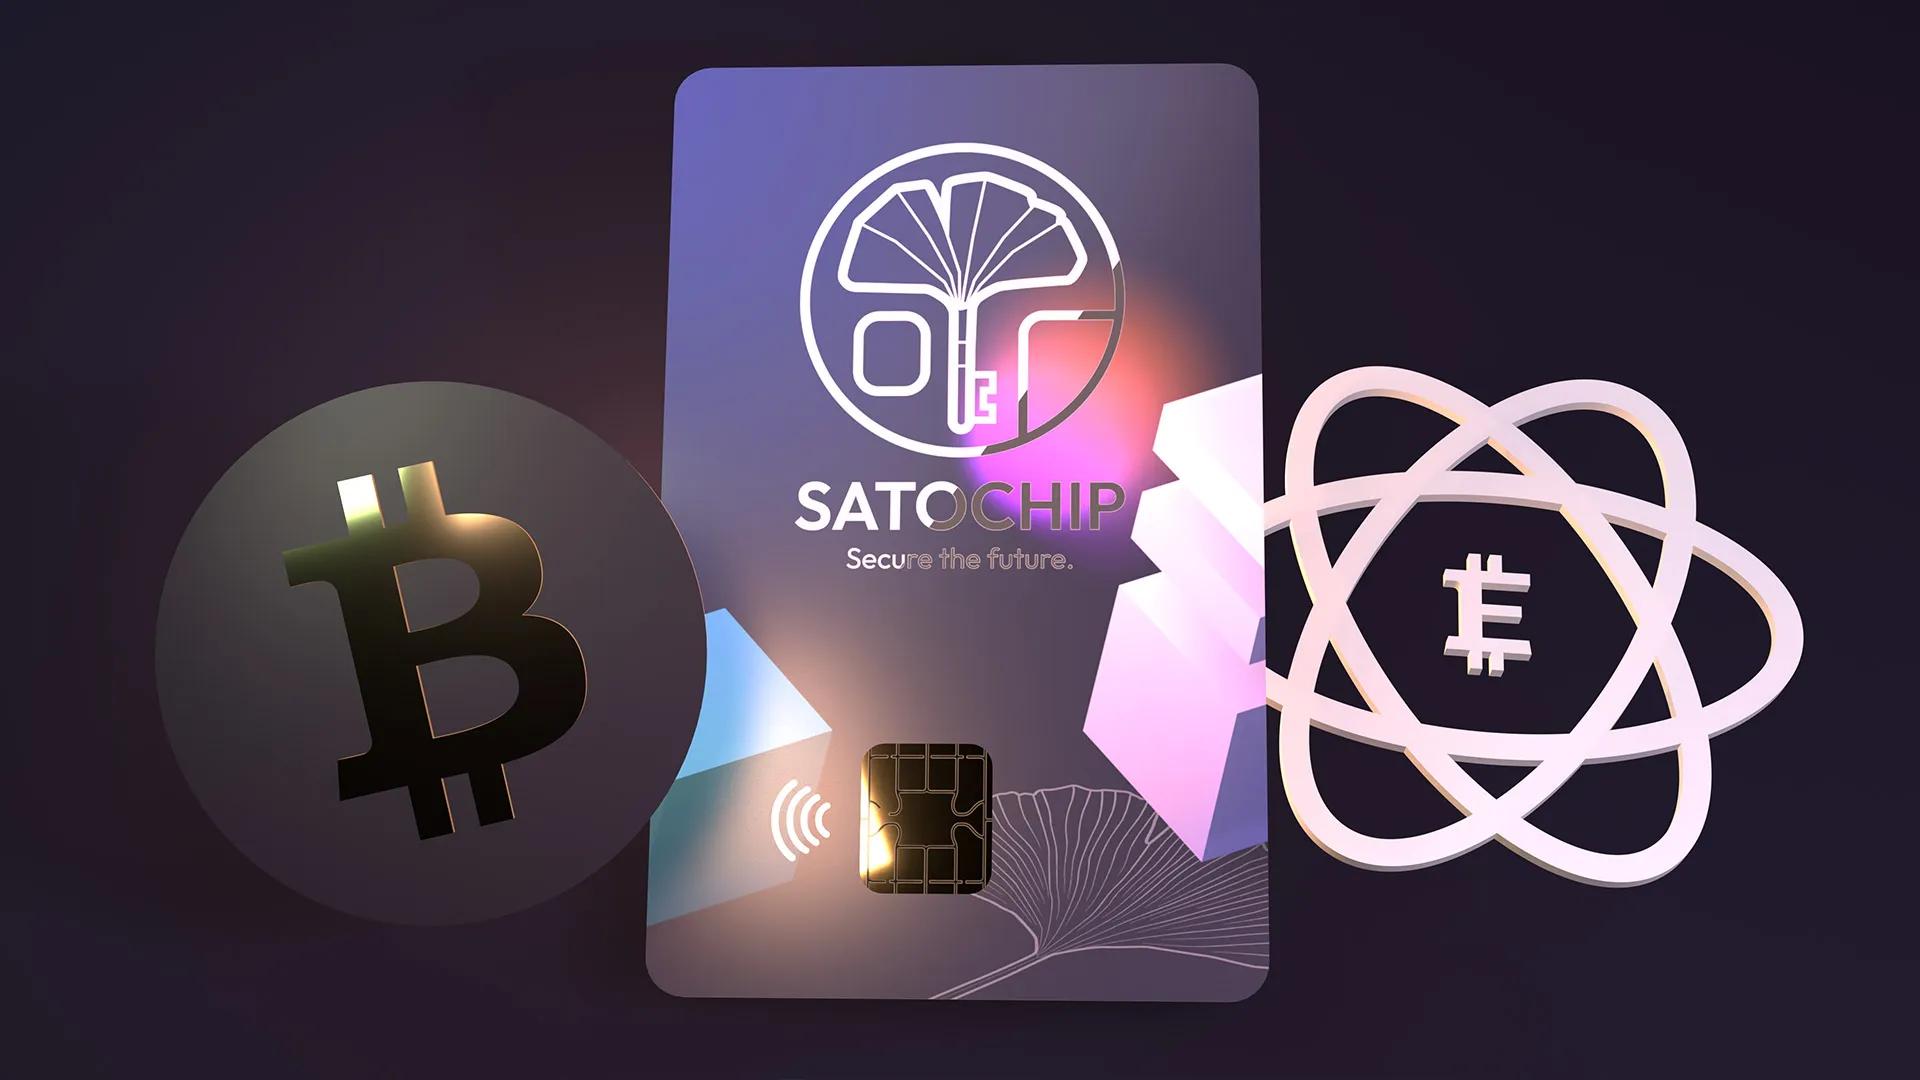 Satochip does support Electrum for Bitcoin.